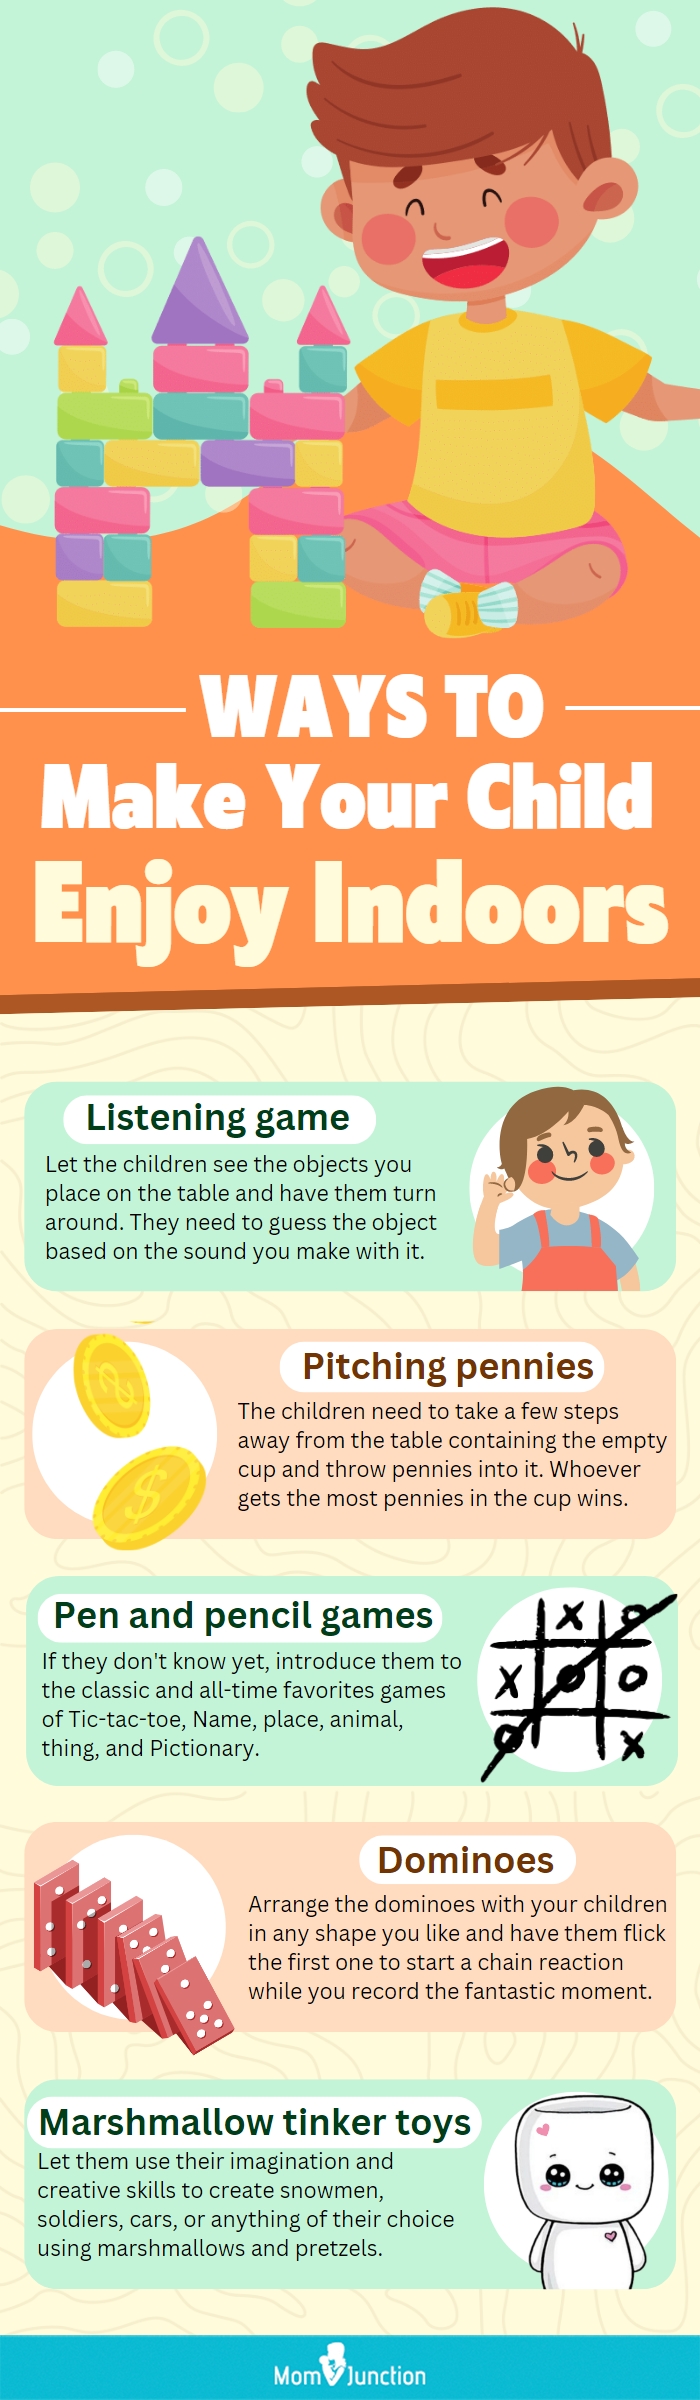 17 Exciting And Interesting Games For 4-Year-Olds To Have Fun